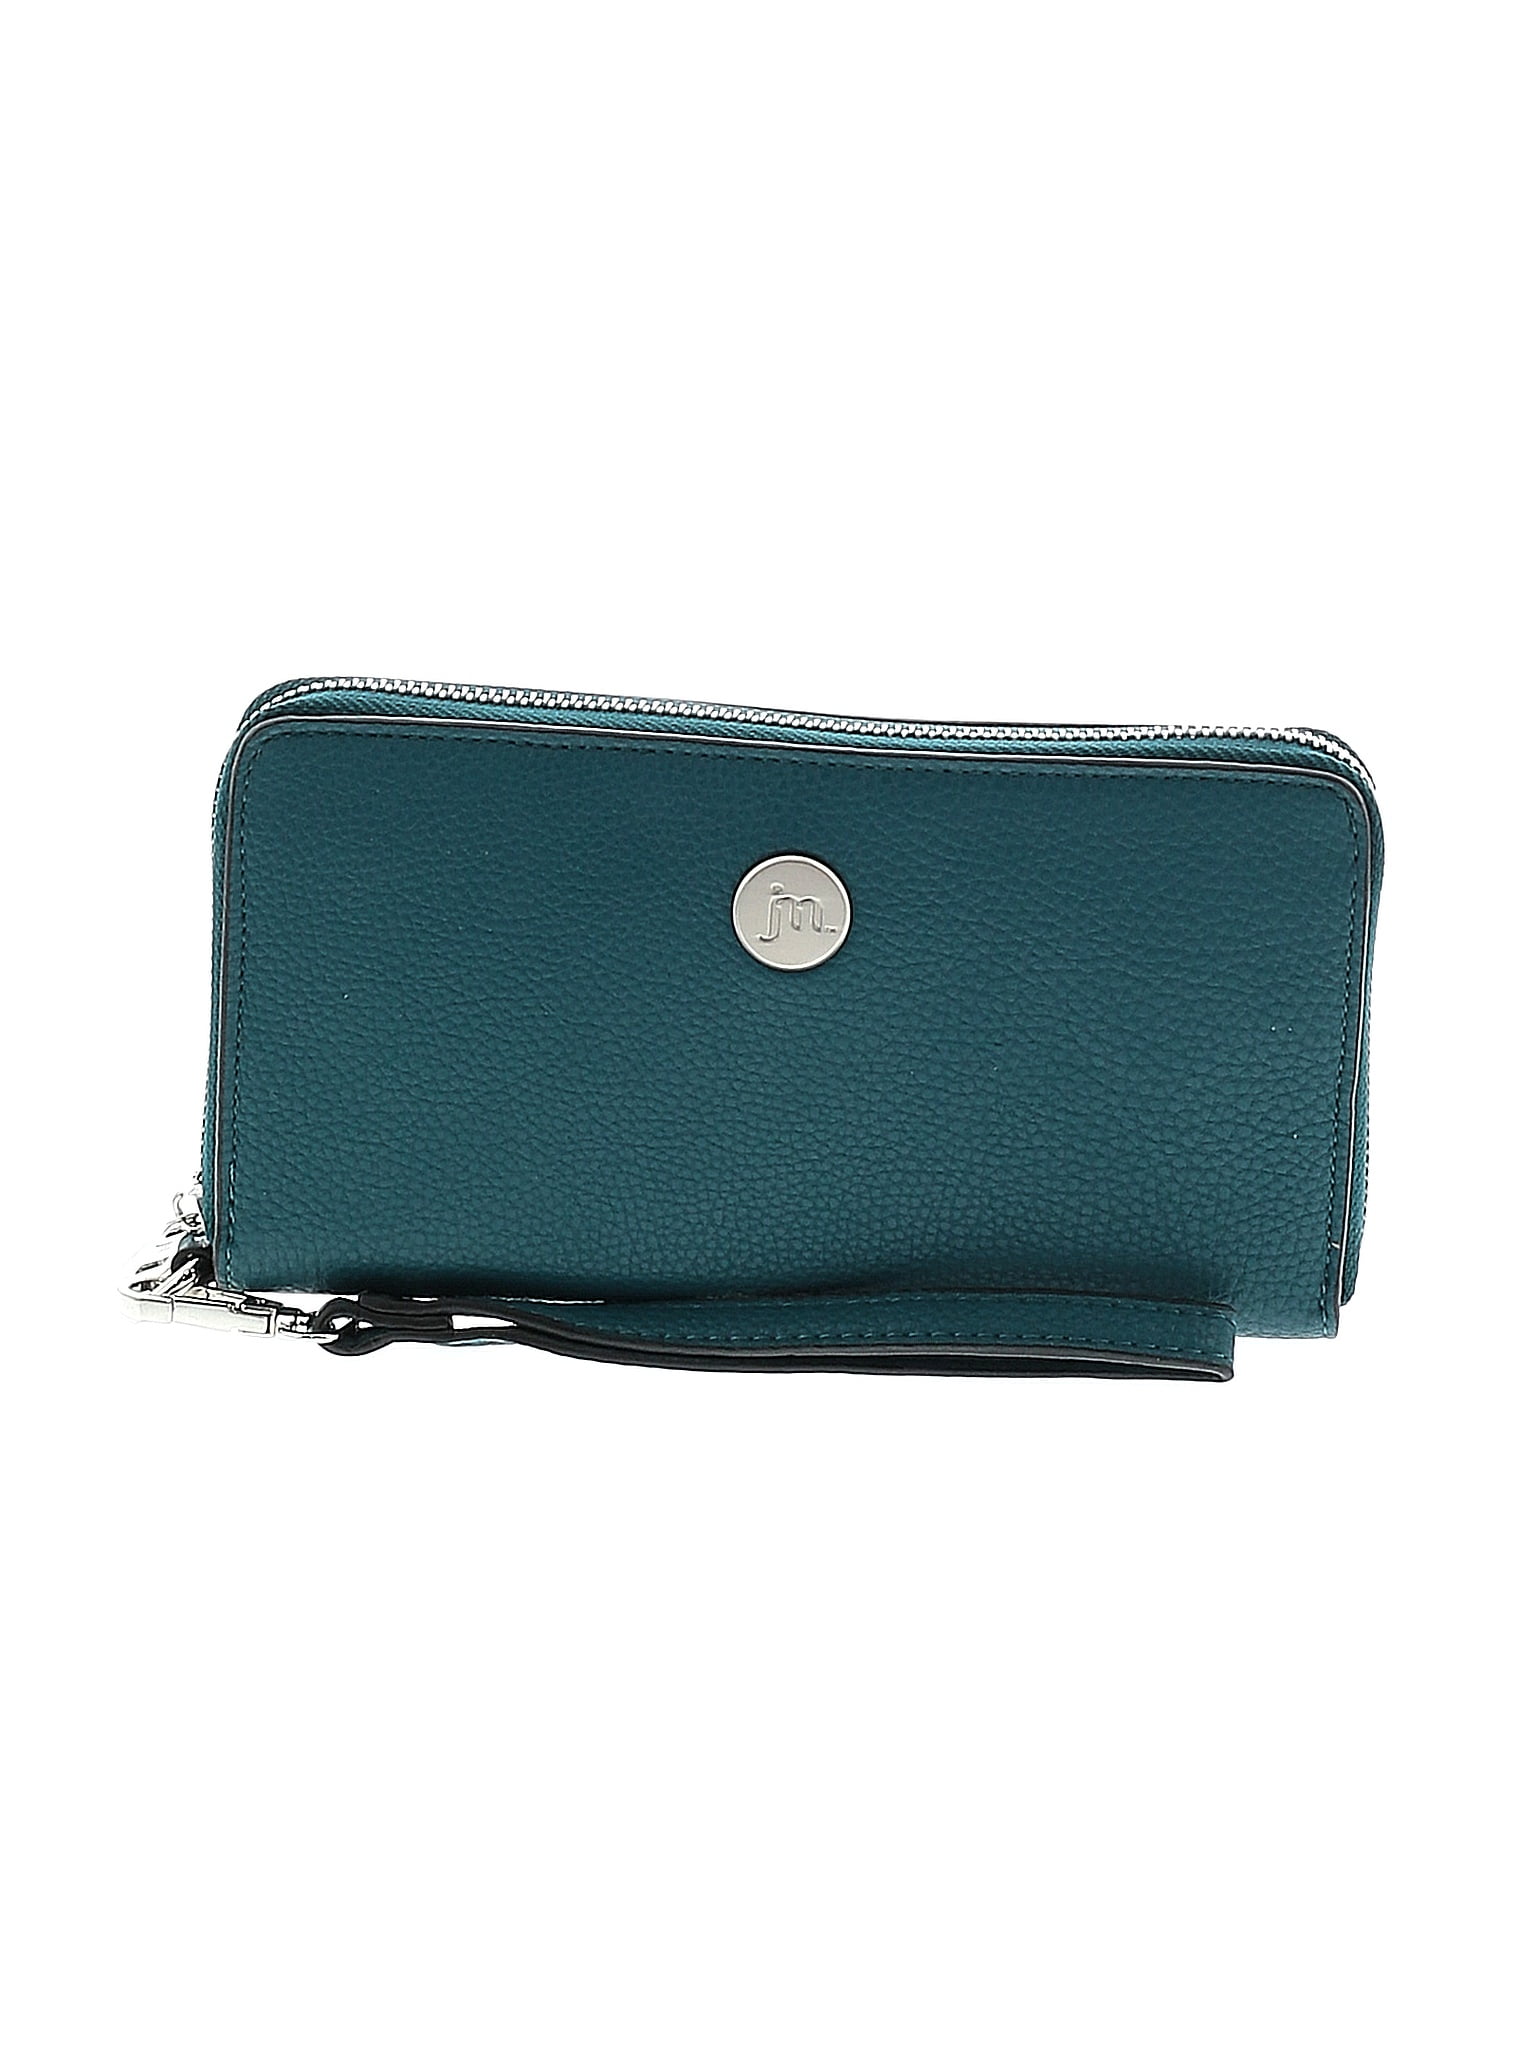 JESSICA MOORE COLLECTION PURSES WALLET CLUTCH NEW** - clothing &  accessories - by owner - apparel sale - craigslist